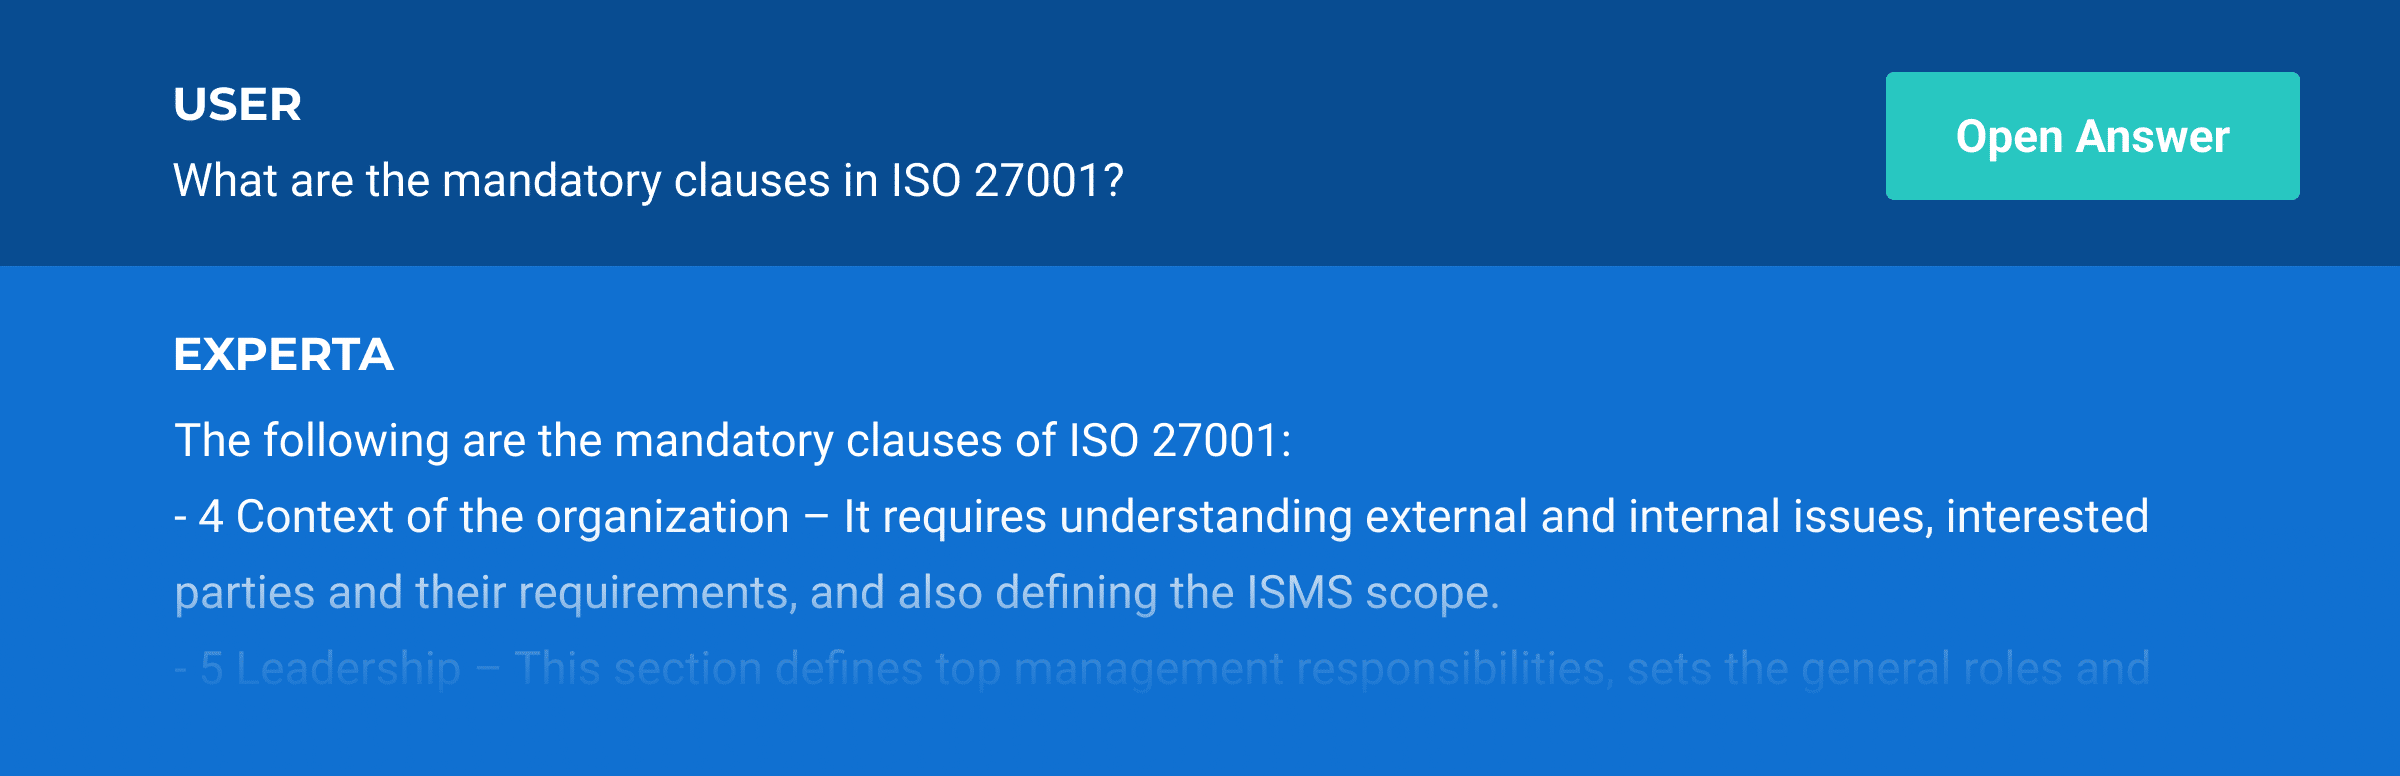 How can AI help ISO 27001 consultants? - 27001Academy